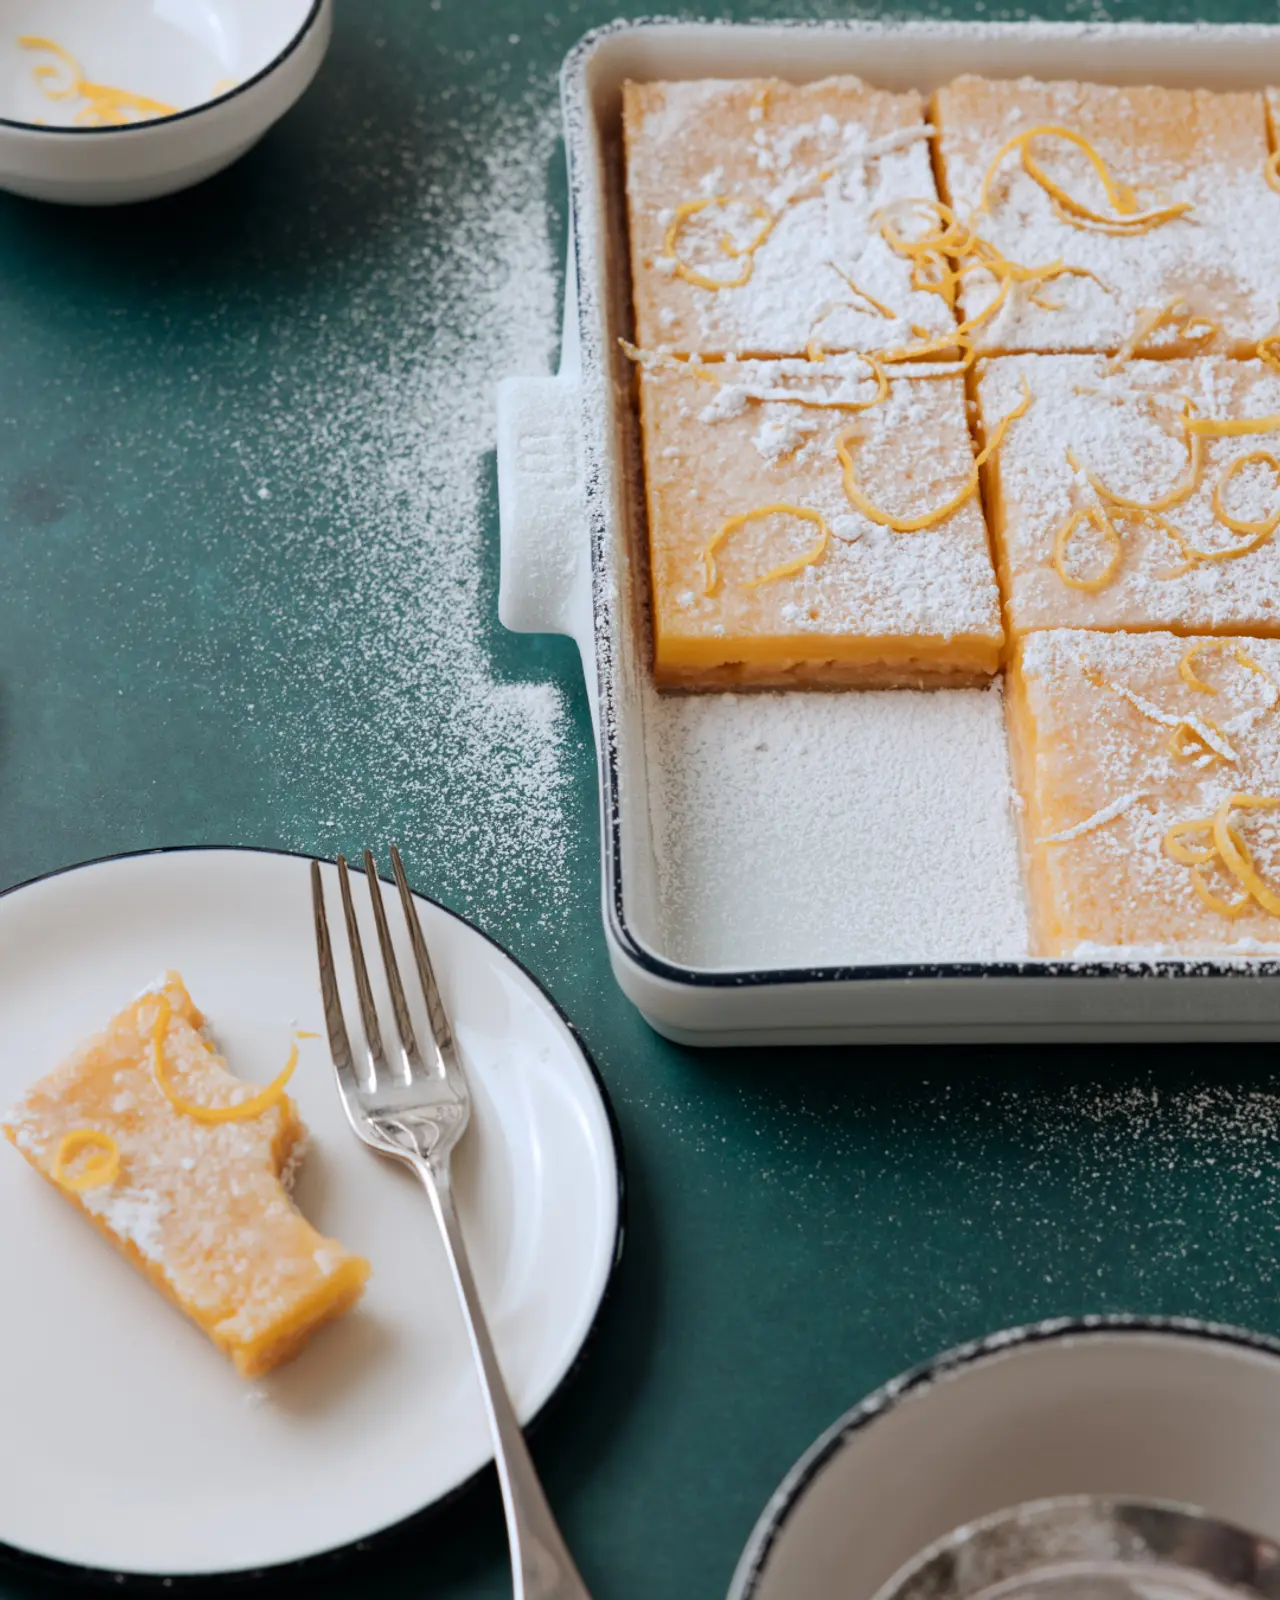 A baking dish holds lemon bars dusted with powdered sugar on a green surface, with one bar served on a plate beside it.